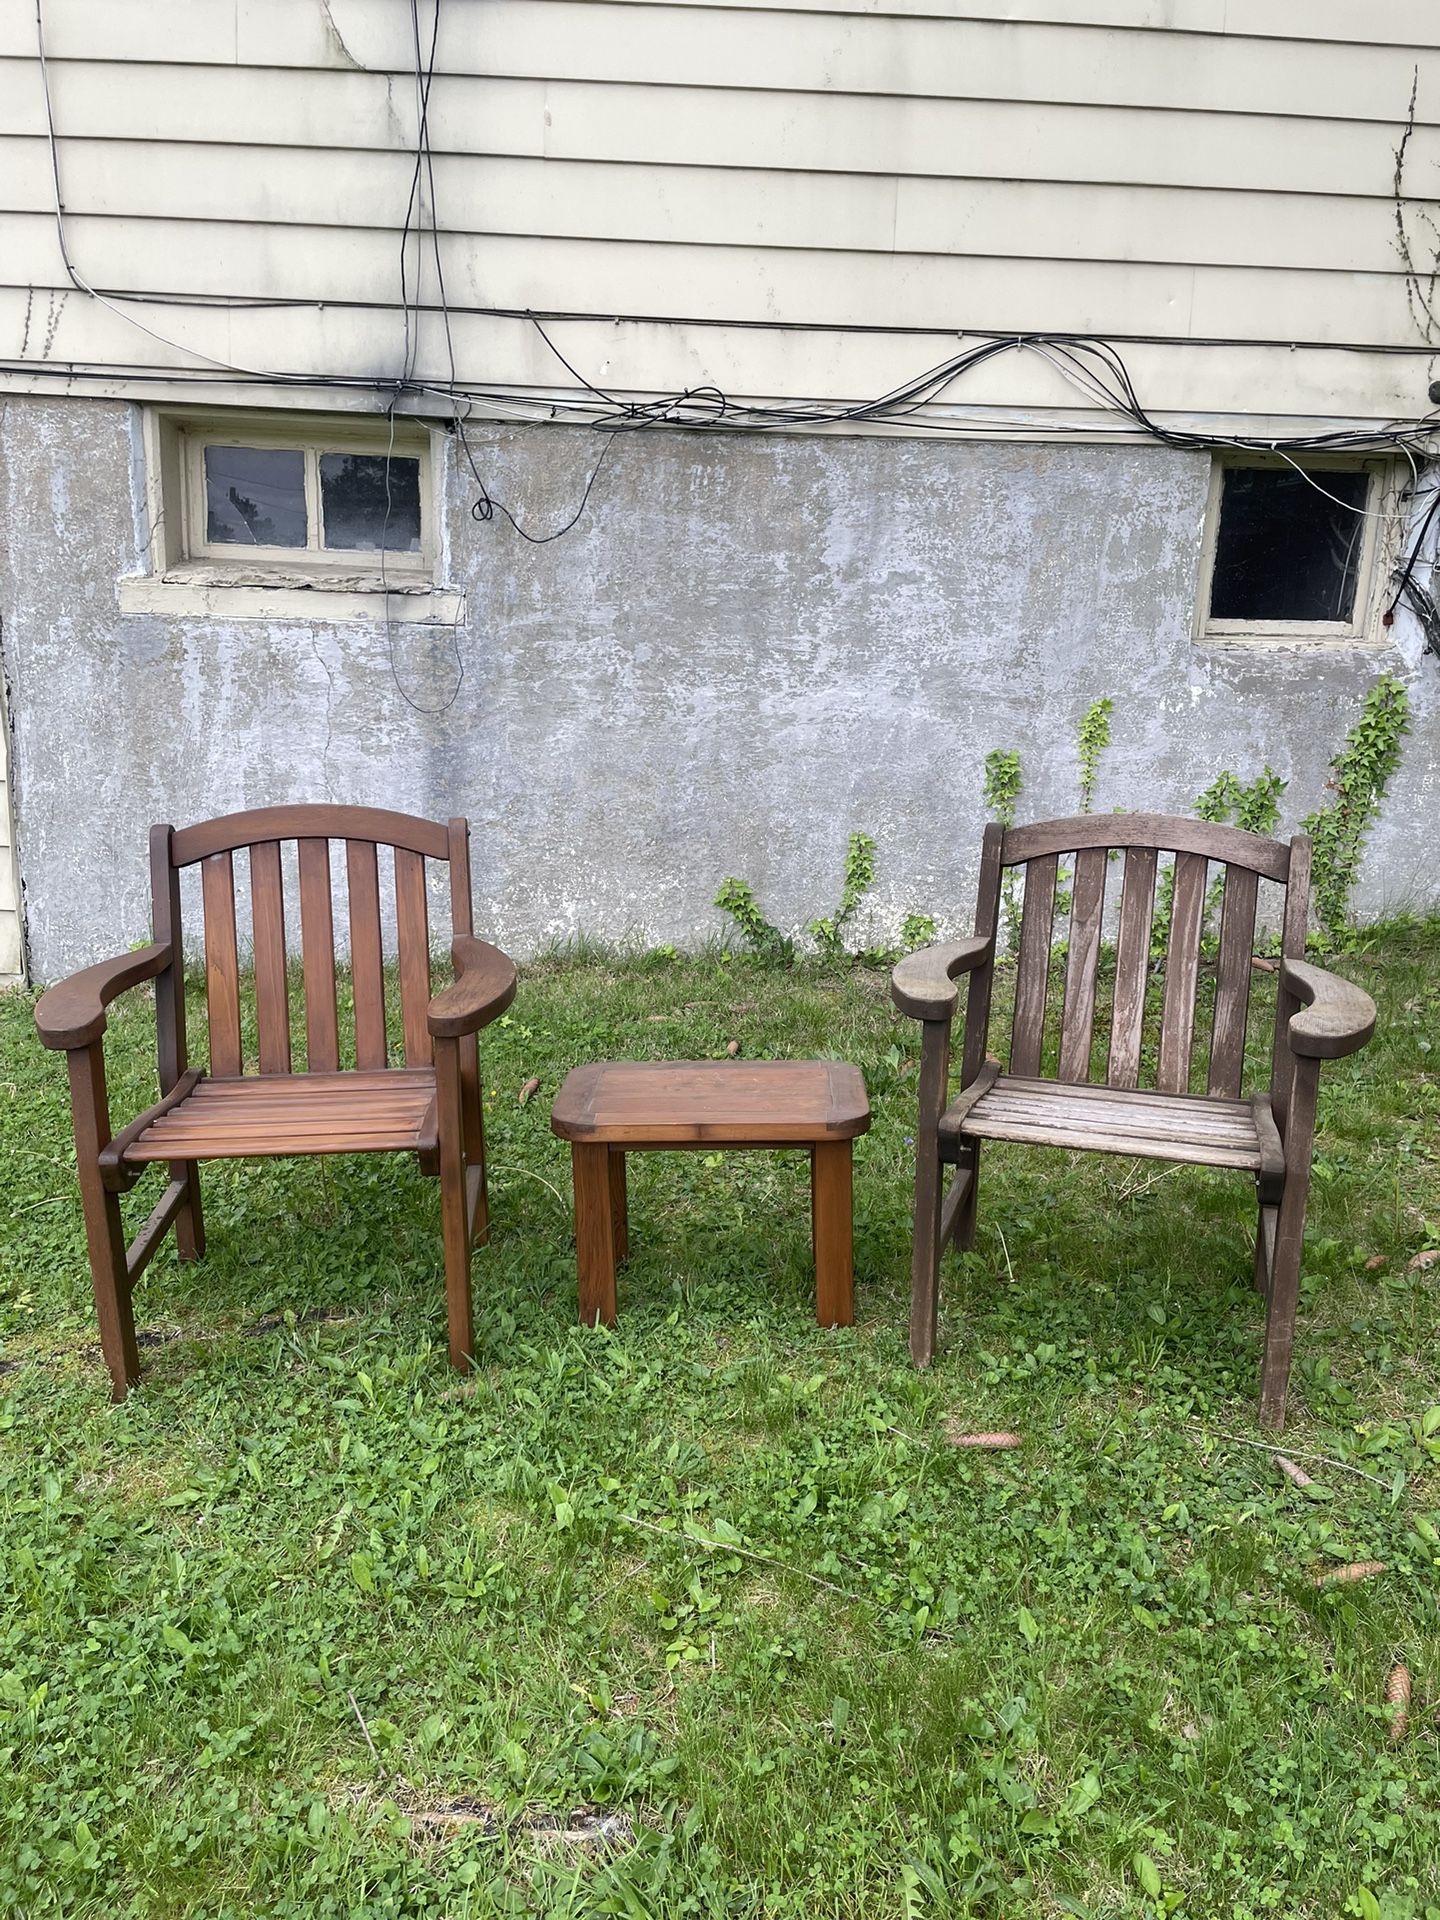 Cedar Porch Chairs and Table